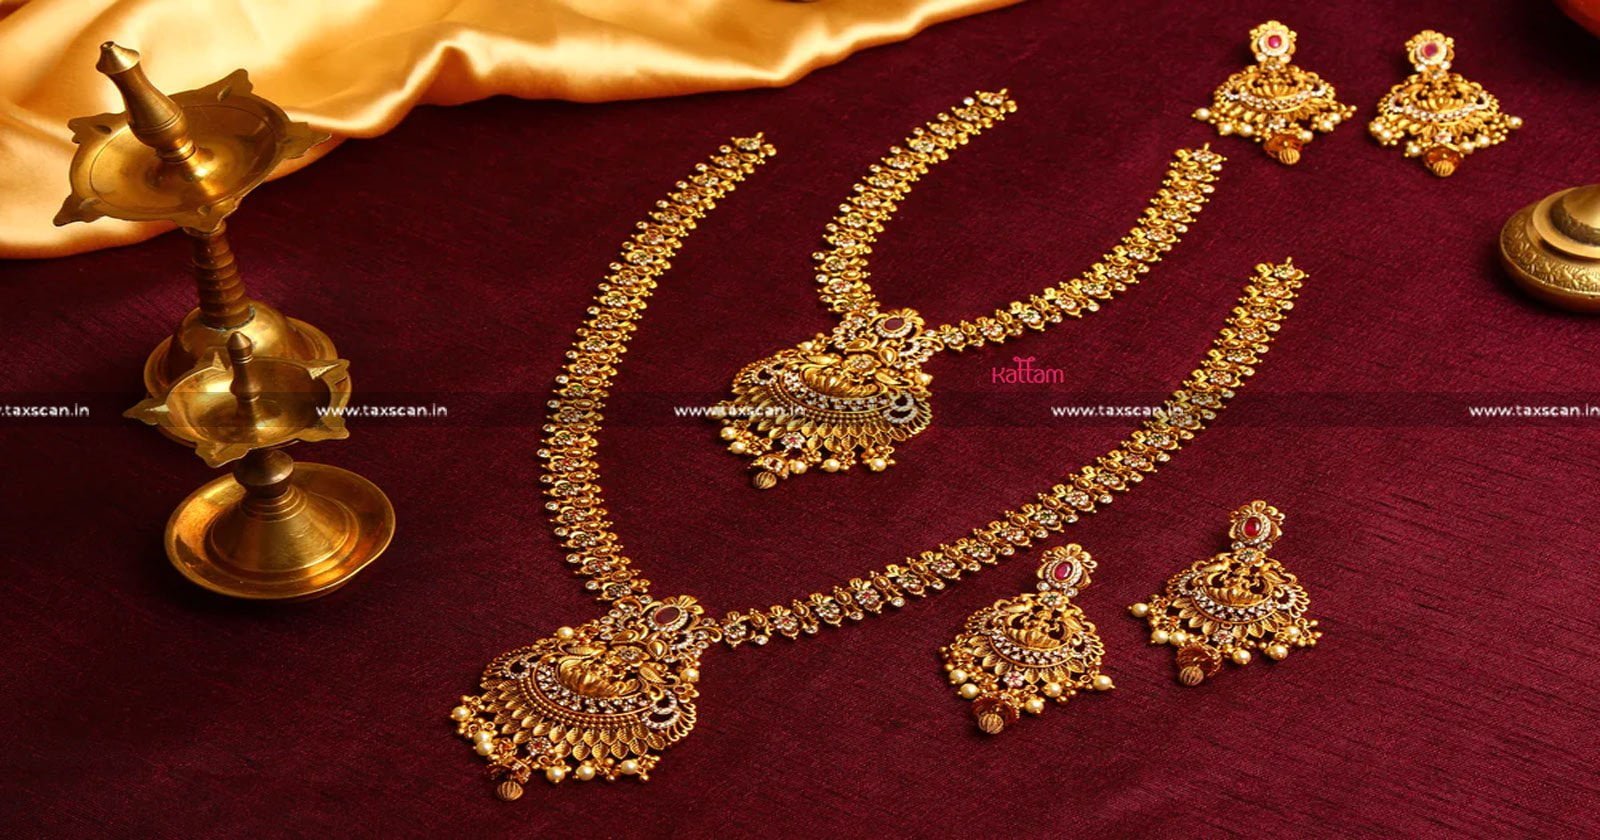 Status - and - Traditional - Practices - Unexplained - Jewellery - ITAT - NRI - woman - TAXSCAN